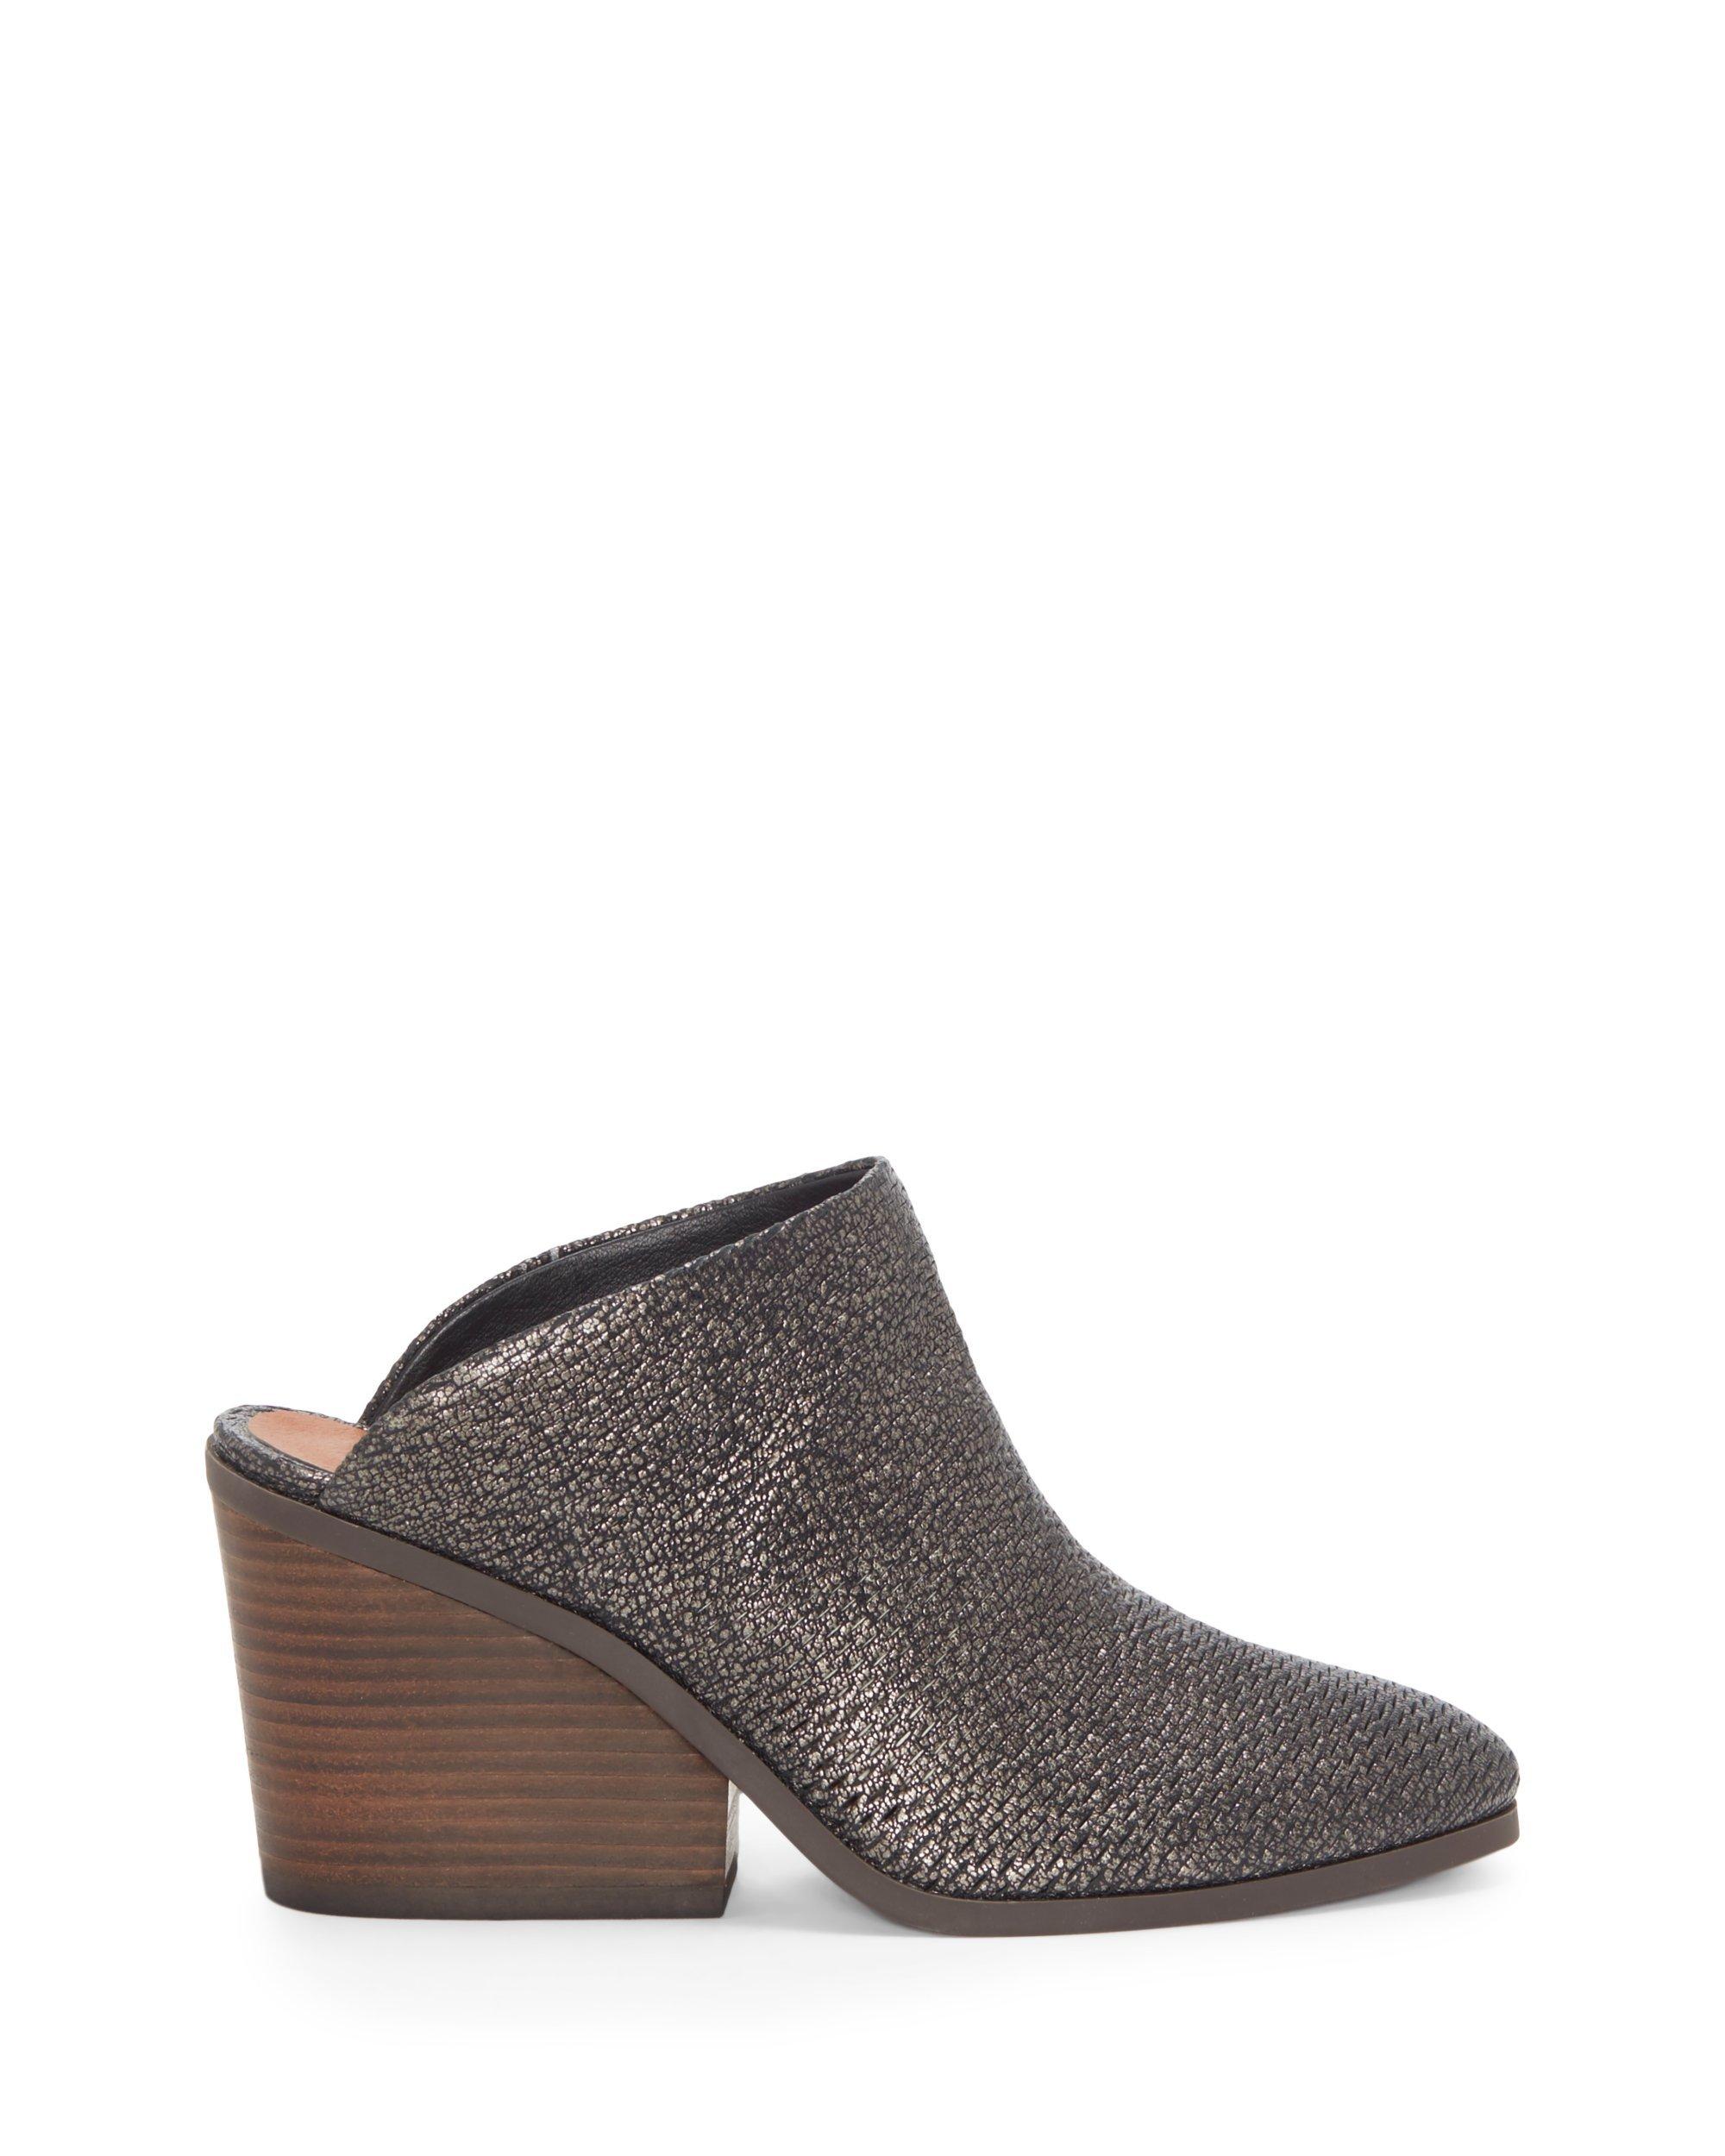 LARSSON WEDGE | Lucky Brand